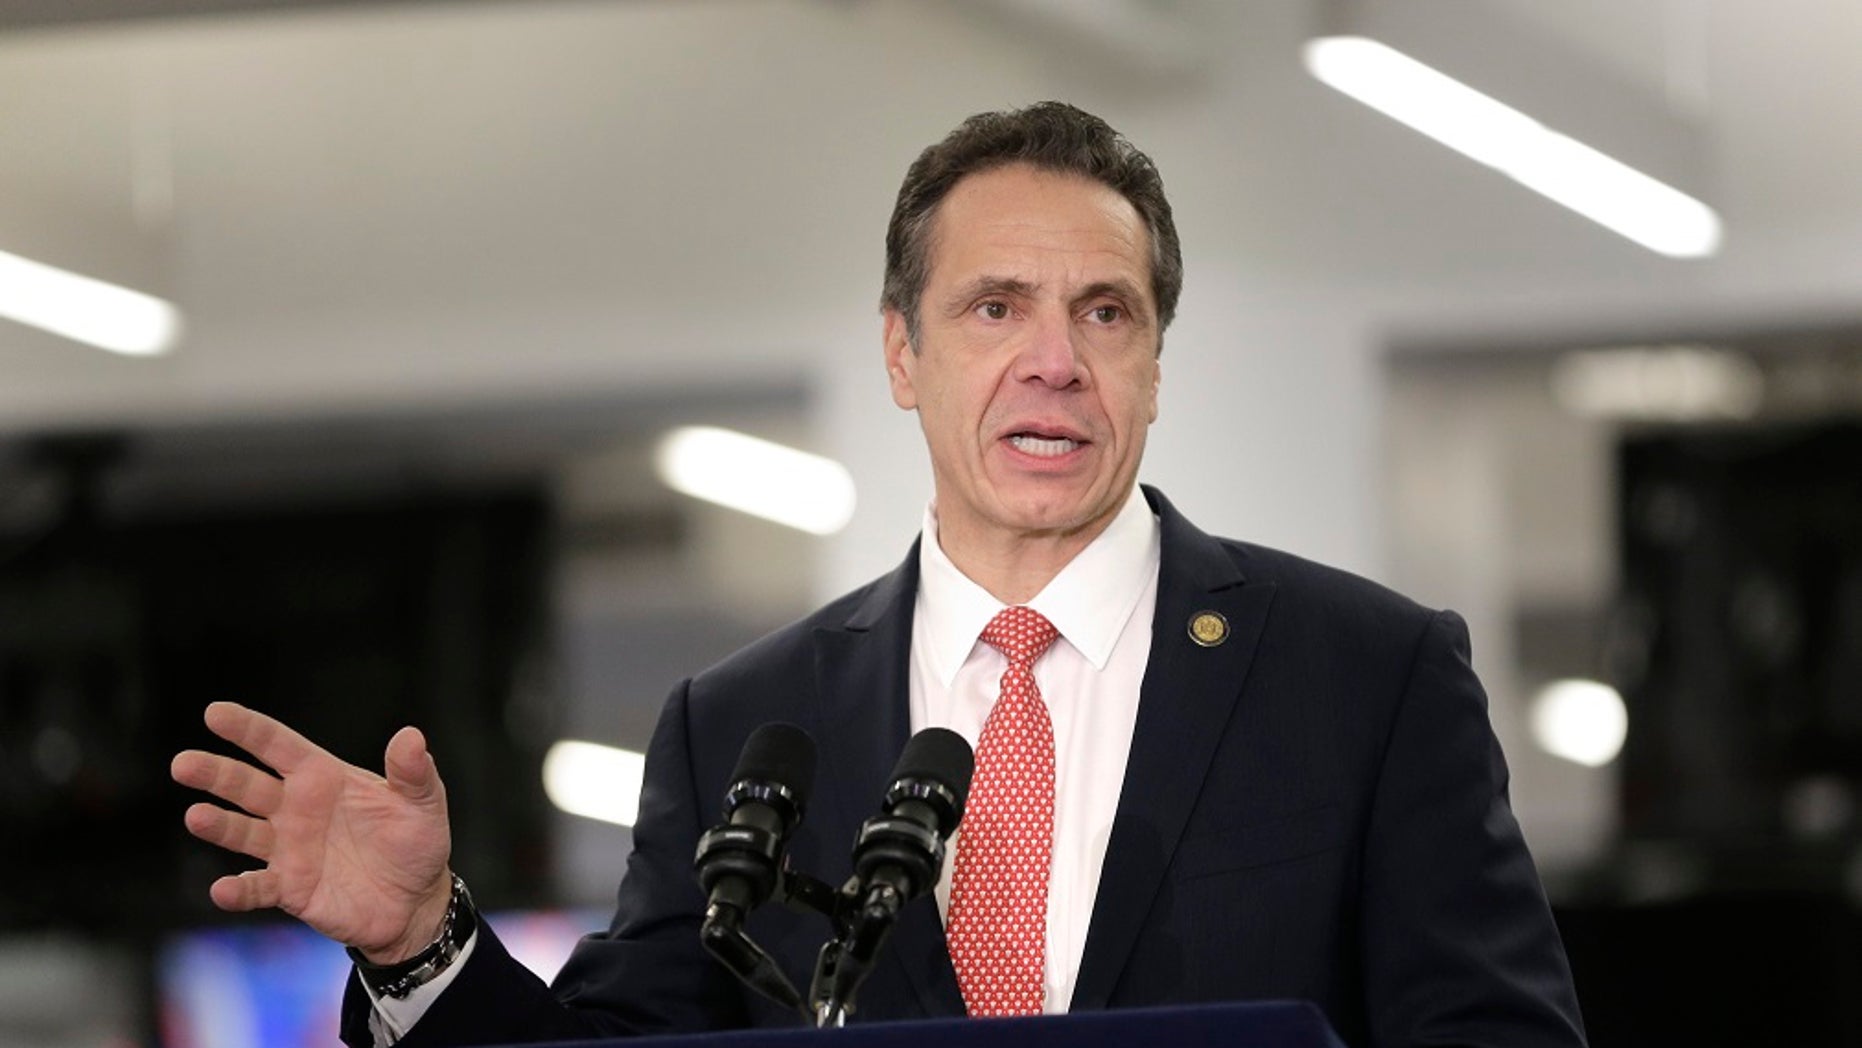 New York Governor Andrew Cuomo vetoed a bill that would have left lottery winners incognito, but a group of recent winners discovered a loophole and decided to form an LLC to remain anonymous. (AP Photo / Seth Wenig)